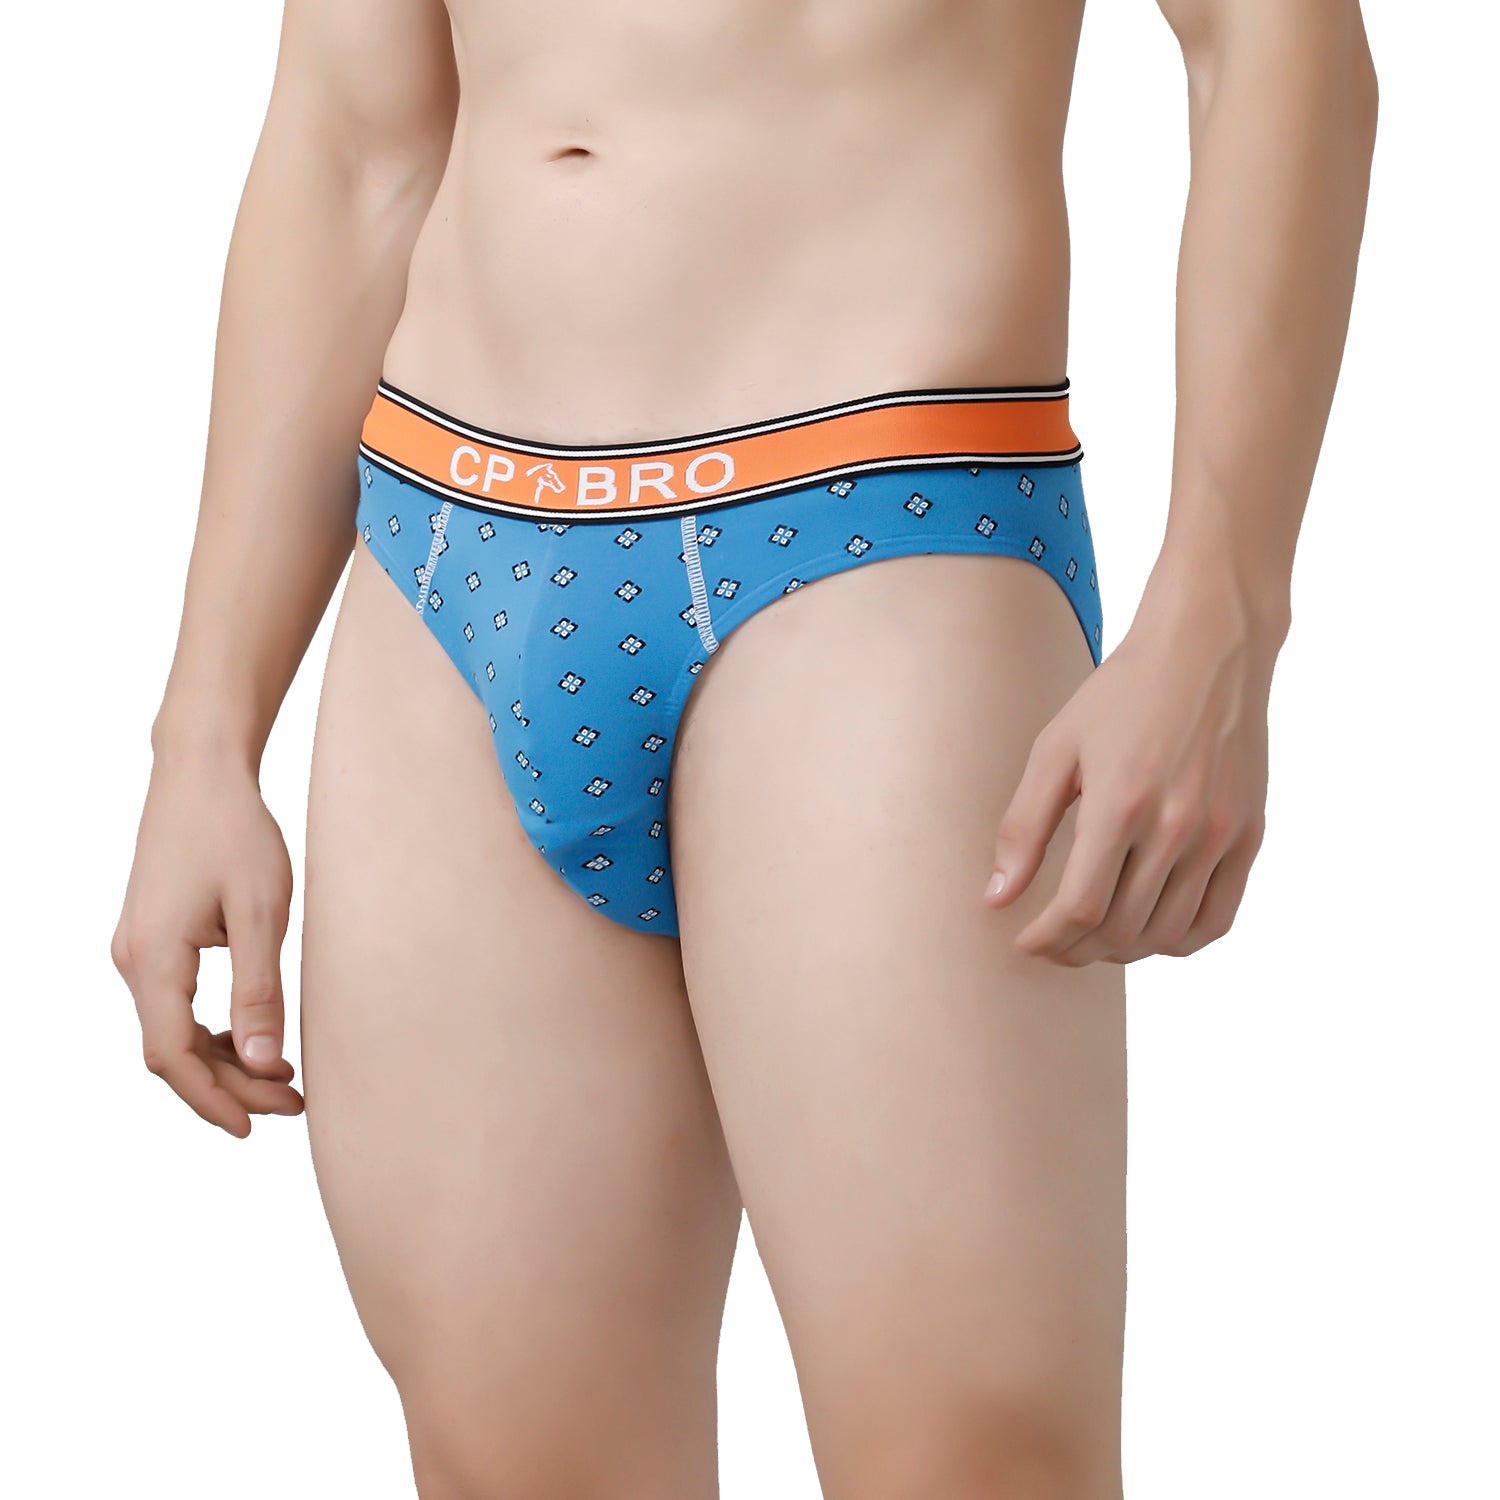 CP BRO Men's Printed Briefs with Exposed Waistband Value Pack - Blue & Blue Leaf (Pack of 2)